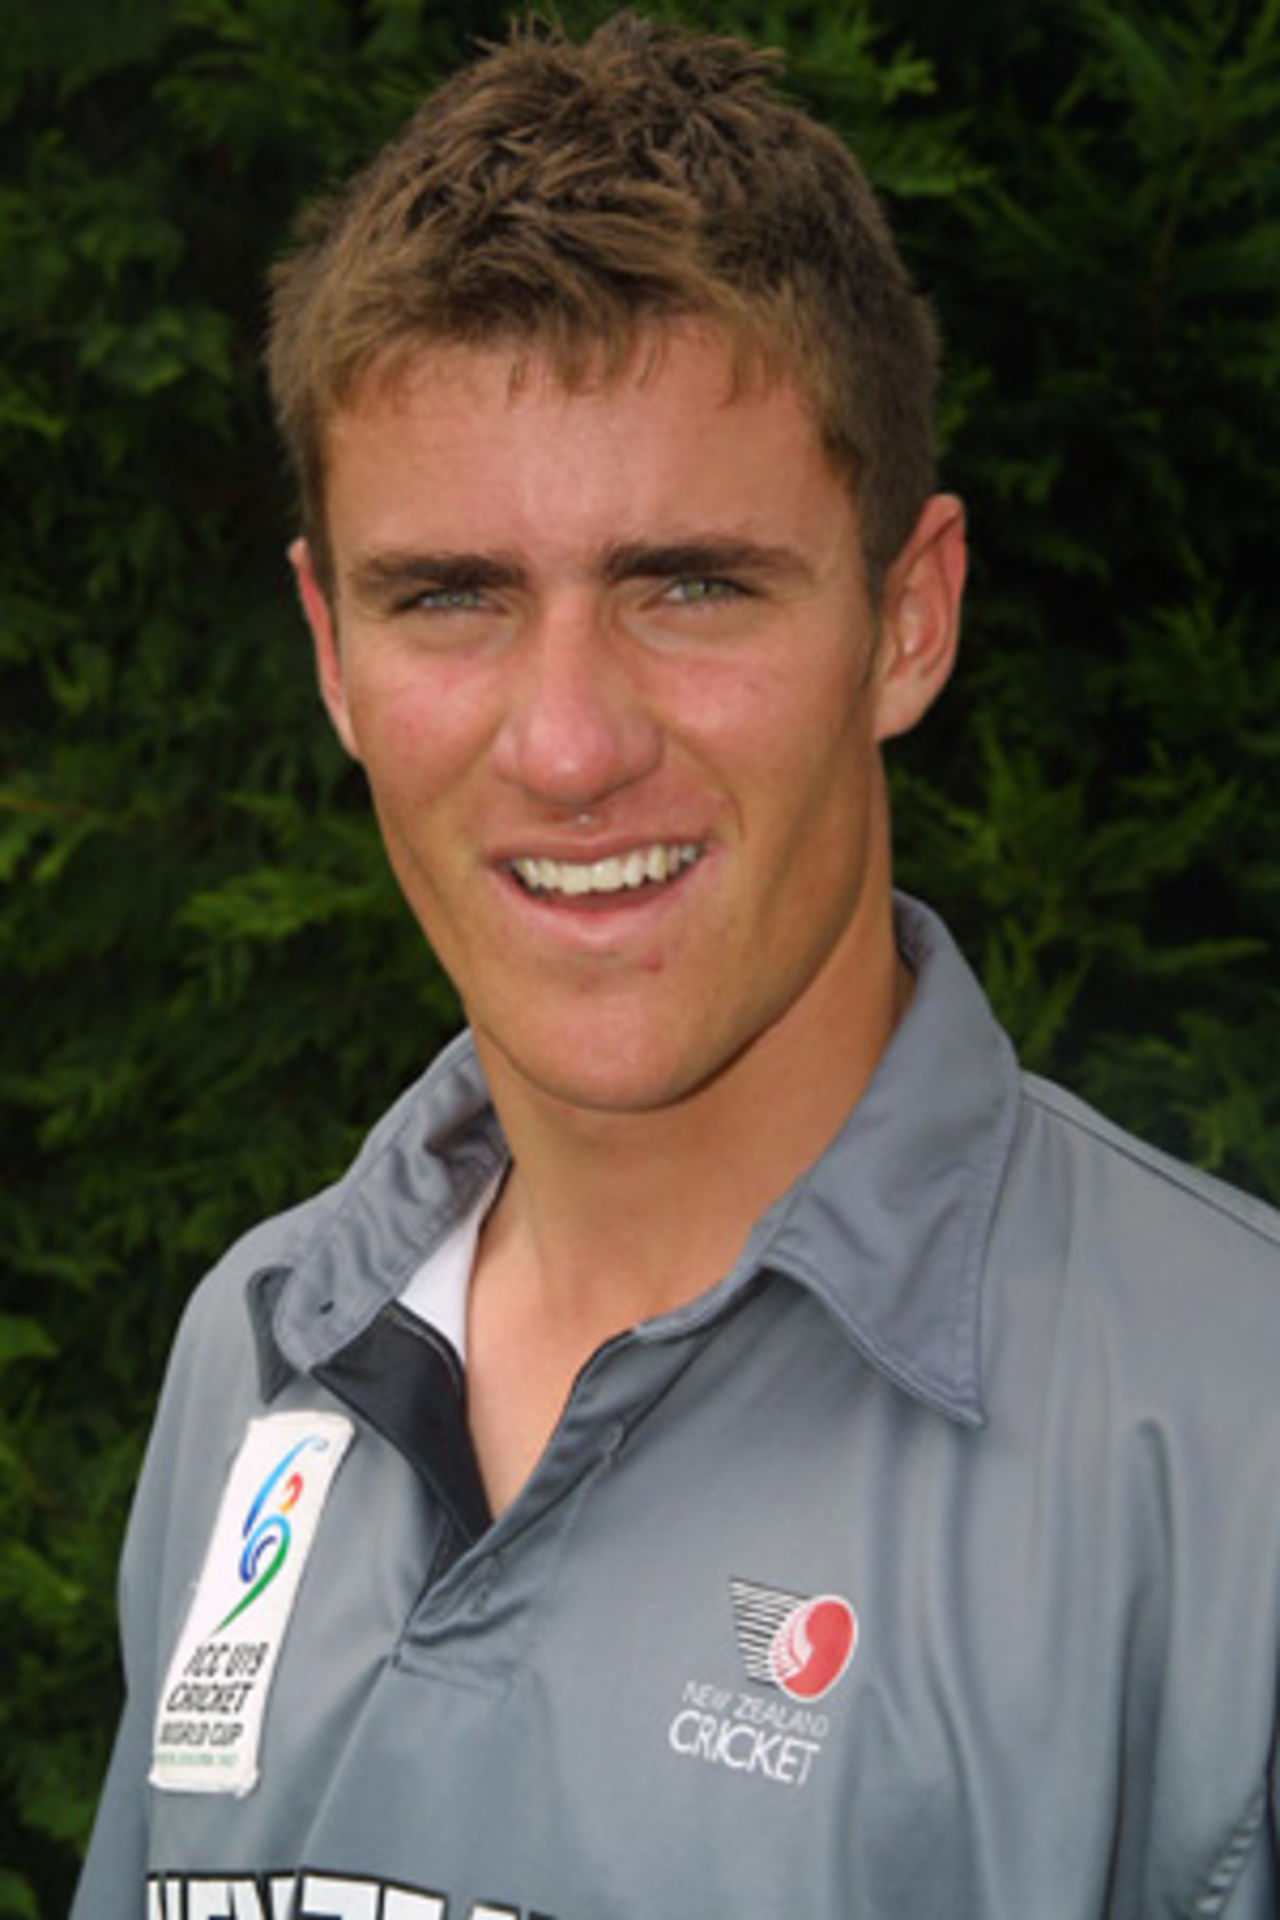 Portrait of Leighton Burtt, January 2002 - New Zealand Under-19 player for the ICC Under-19 World Cup 2002.